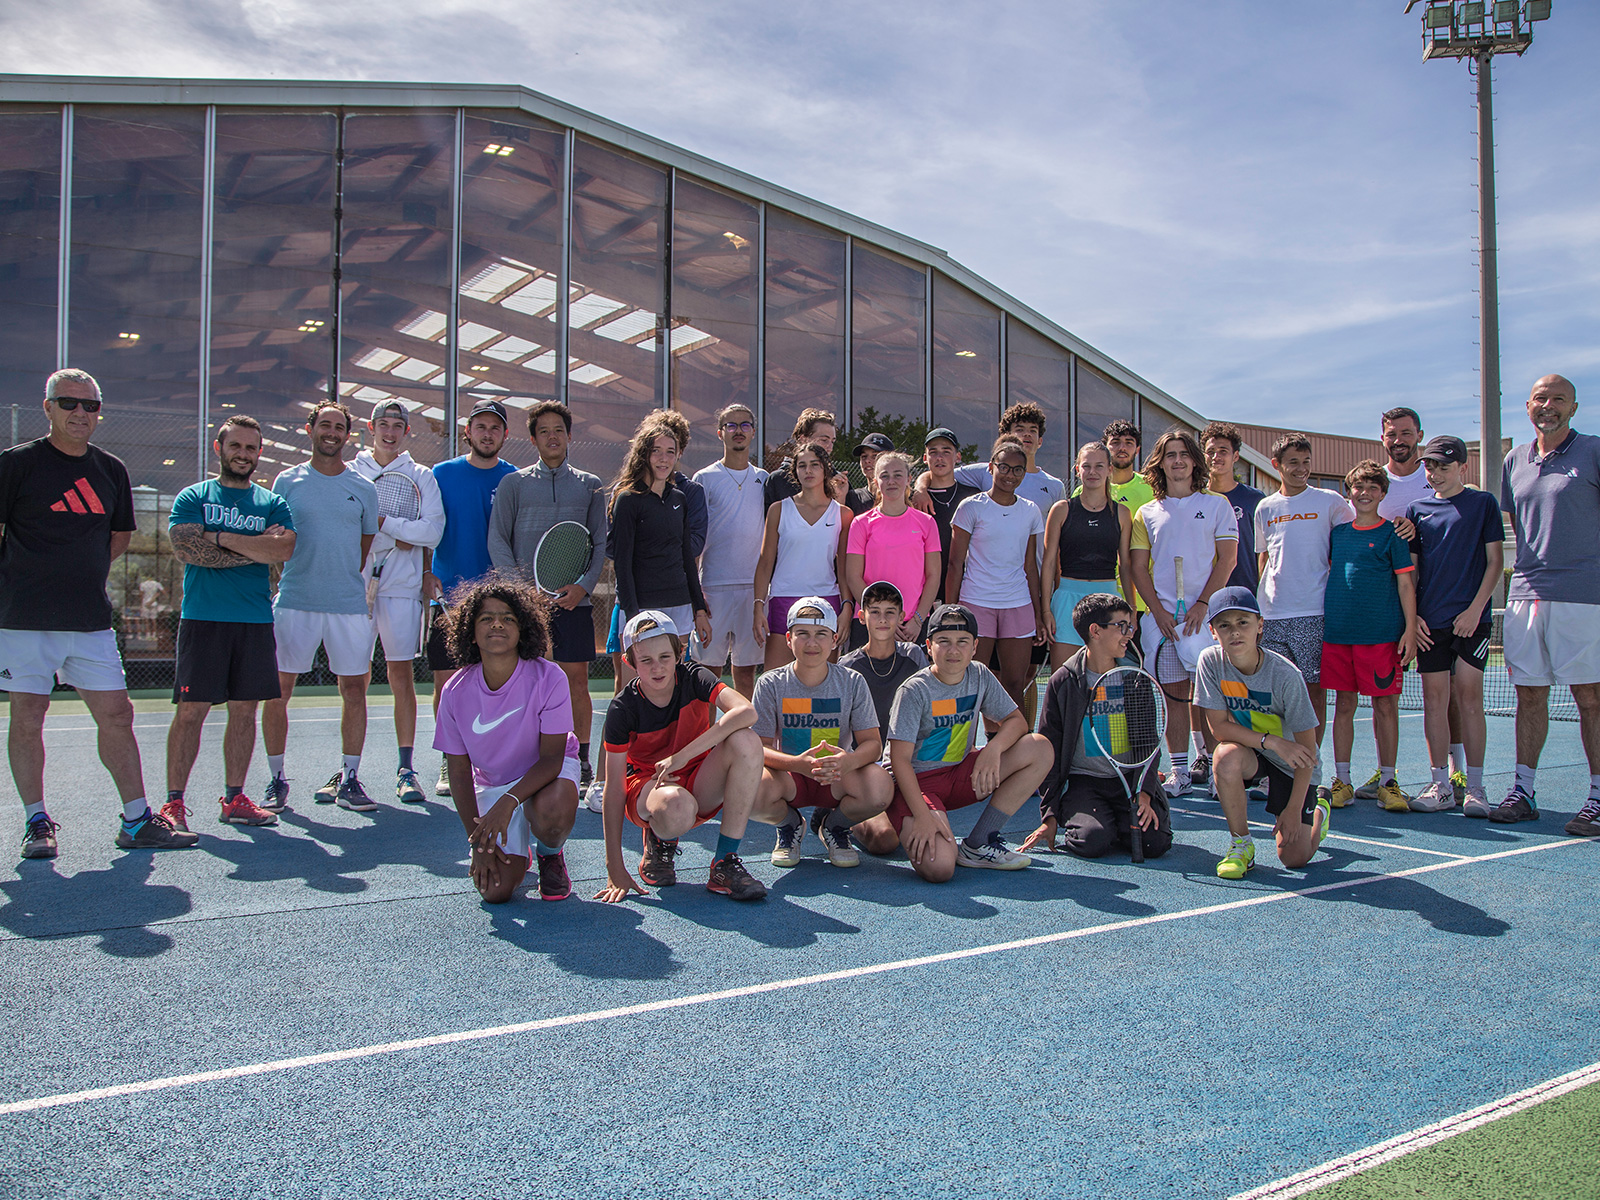 School tennis team and youth players - Academie tennis alain barrere